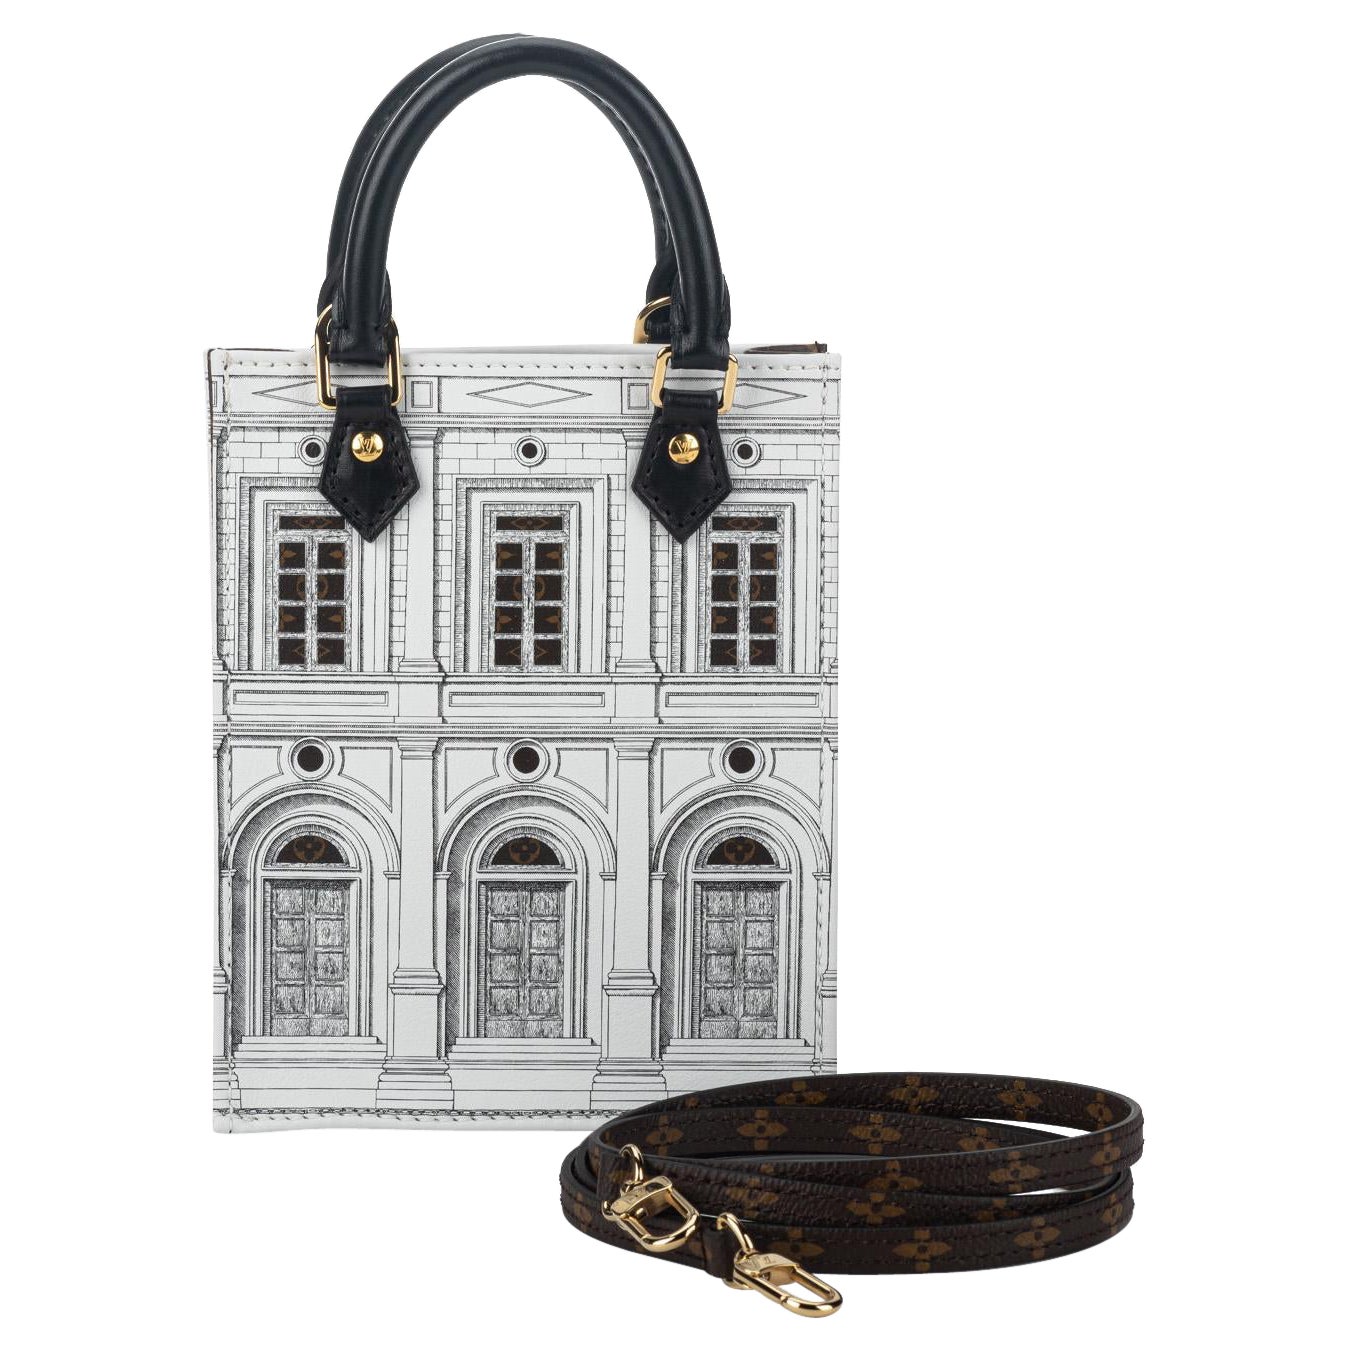 New Louis Vuitton Limited Edition Fornasetti Sac Plat Bag For Sale